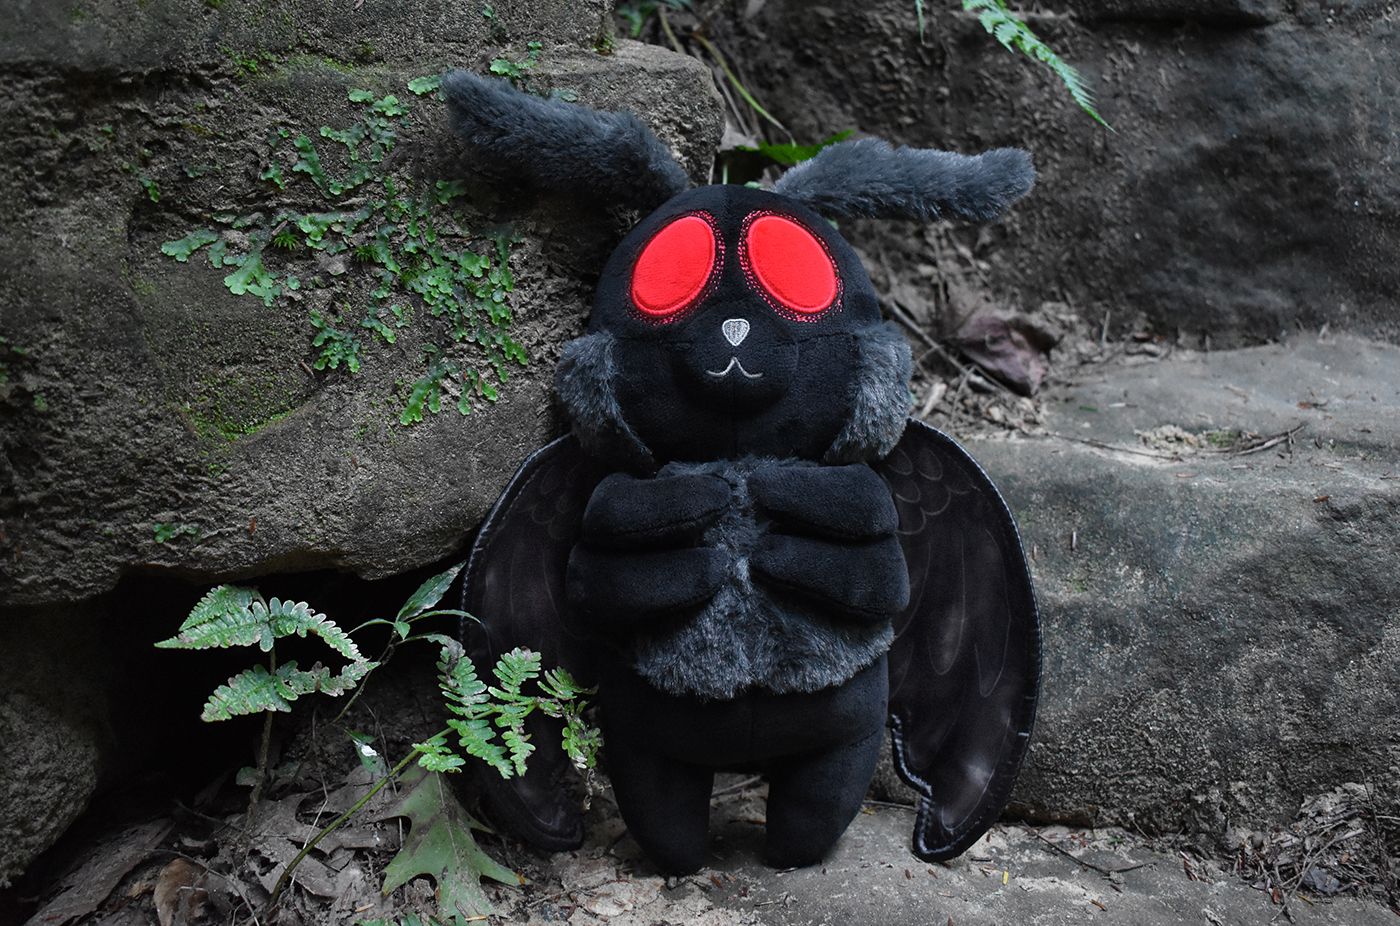 A black plush bunny doll with red eyes